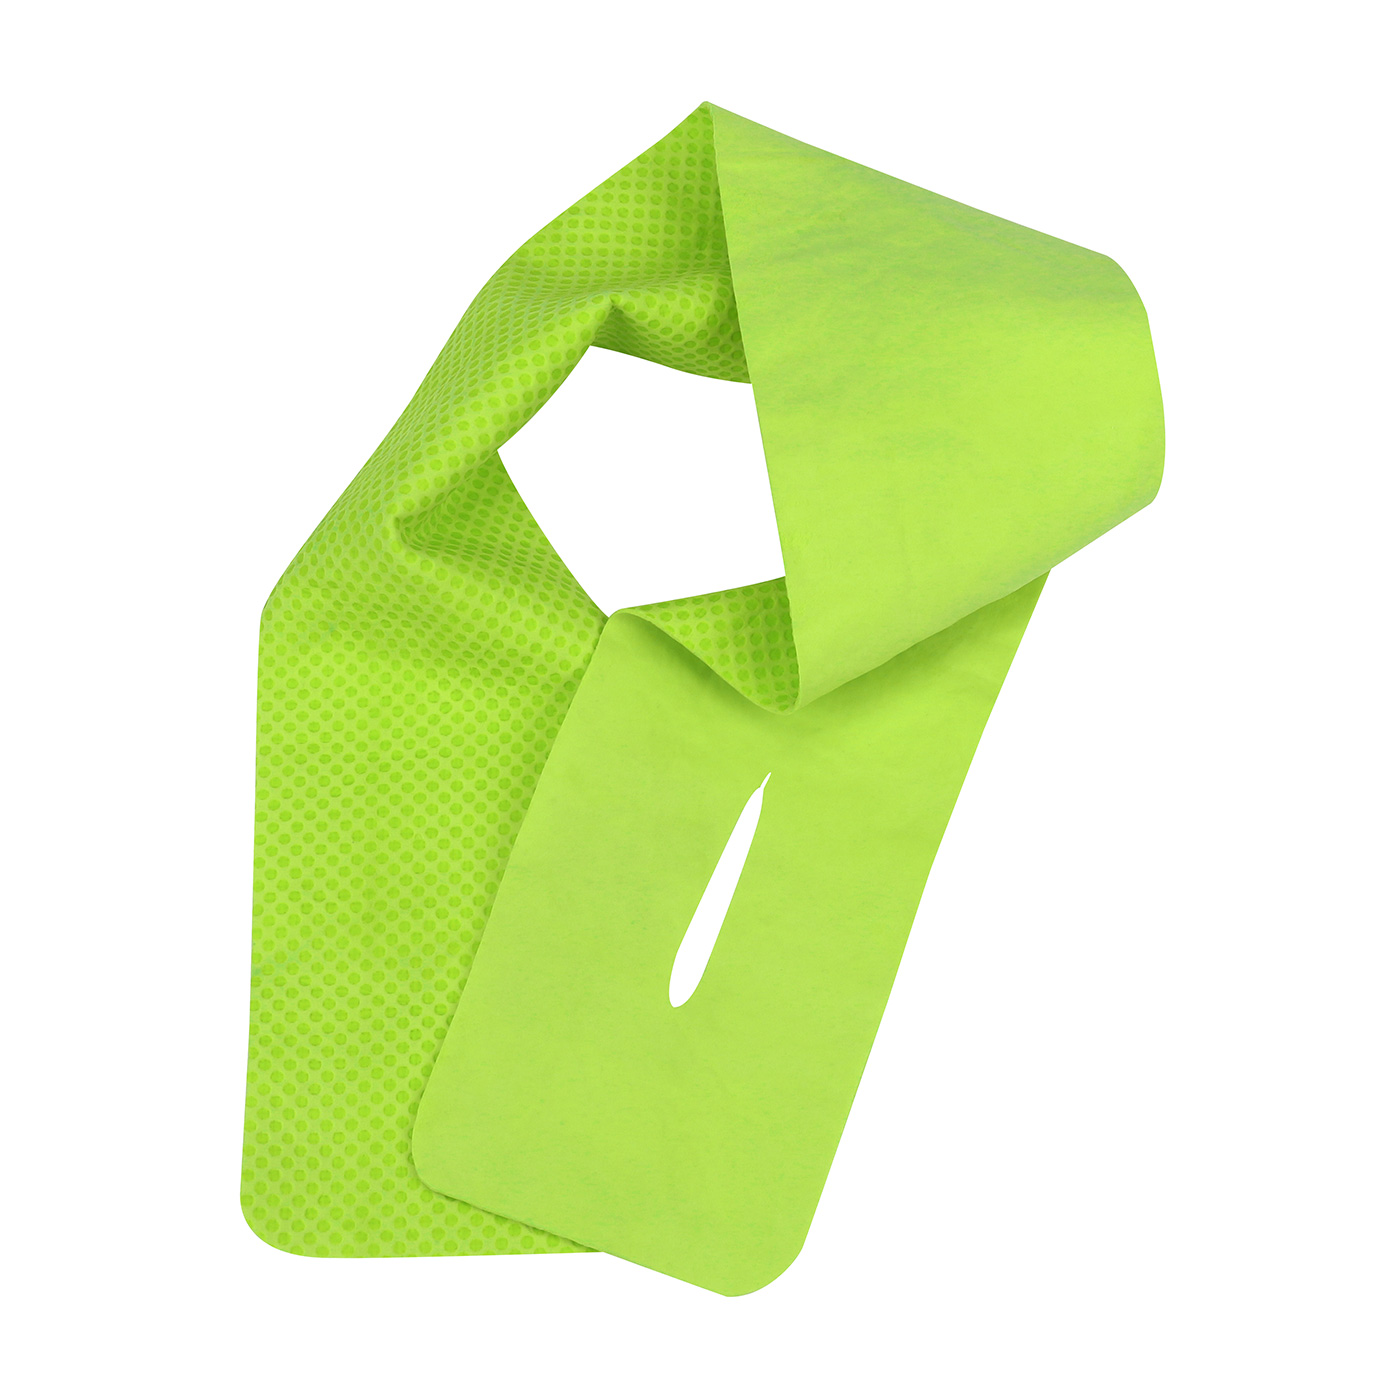 EZ Cool Cooling Neck Band-Lime 393-650-L